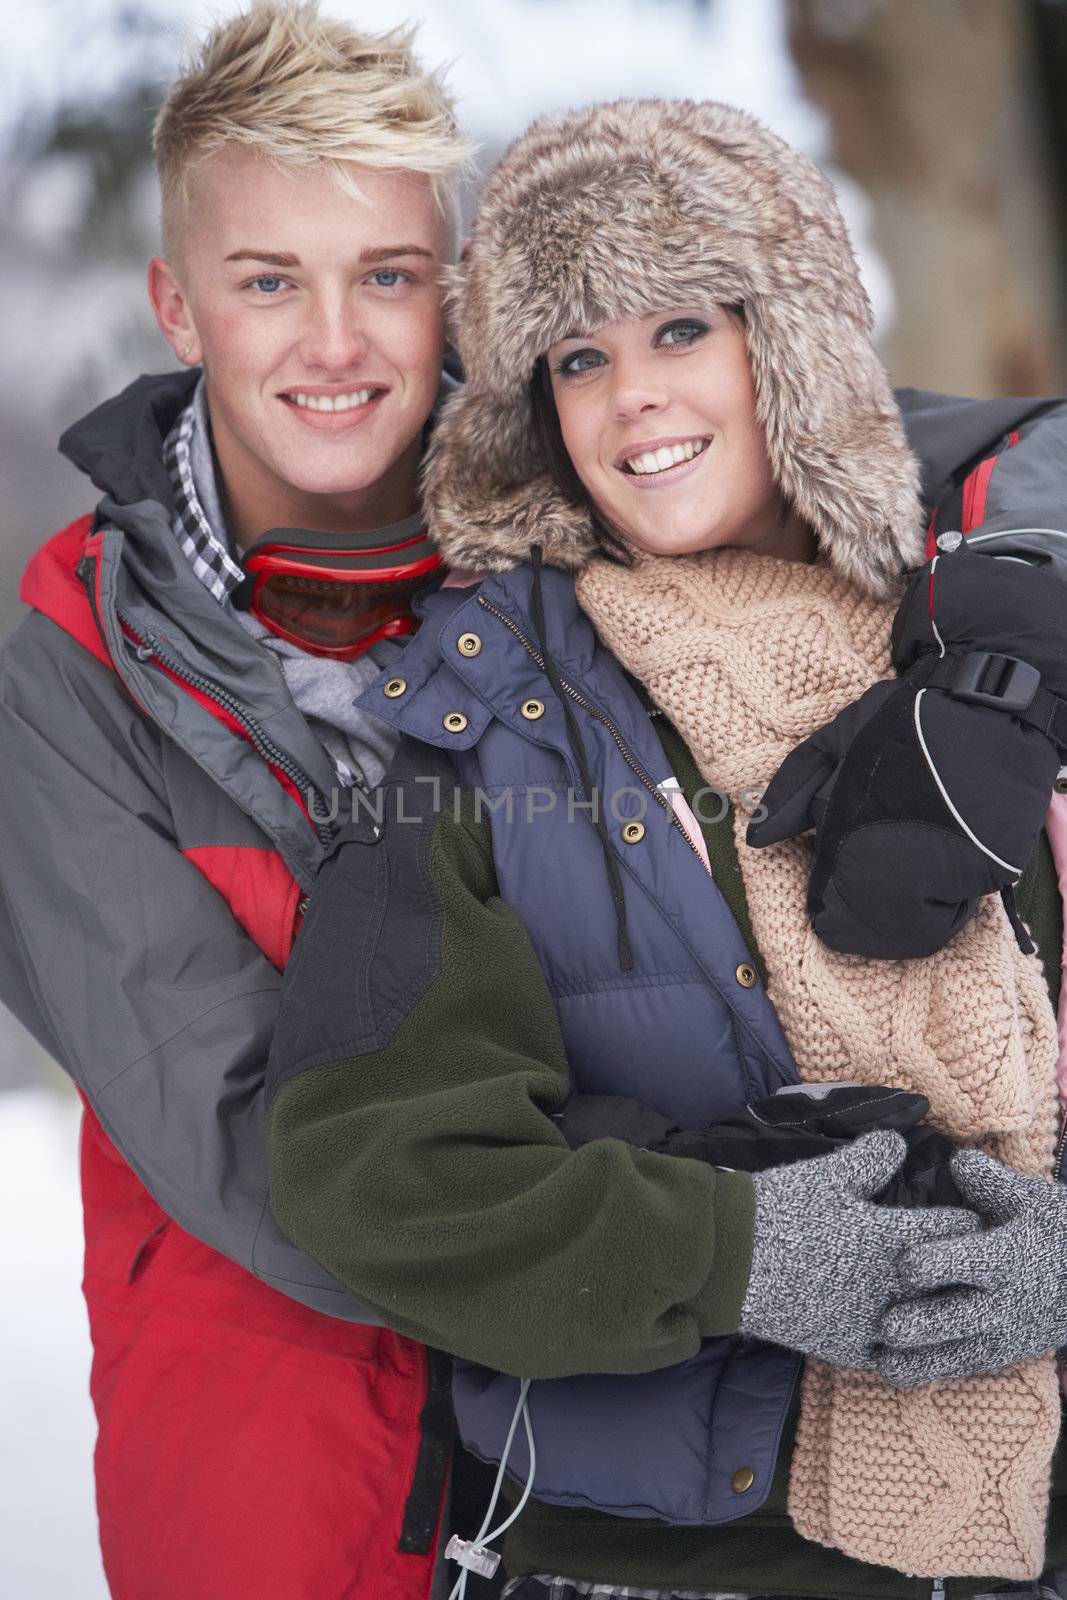 Romantic Teenage Couple In Snow by omg_images